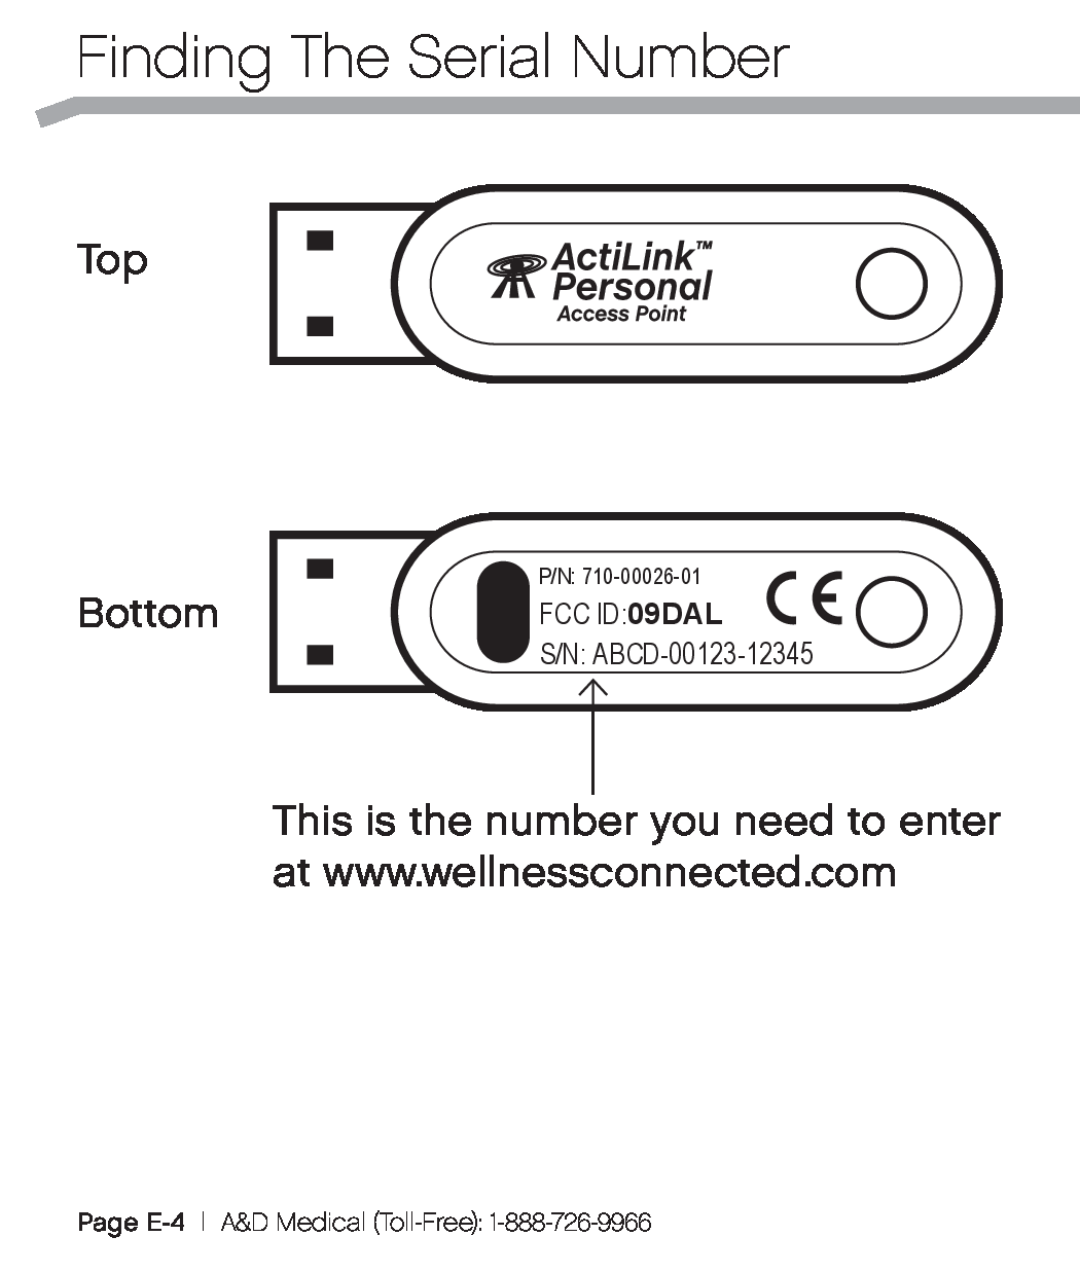 A&D XL-10 Finding The Serial Number, Top Bottom, FCC ID09DAL S/N ABCD-00123-12345, Page E-4 A&D Medical Toll-Free 